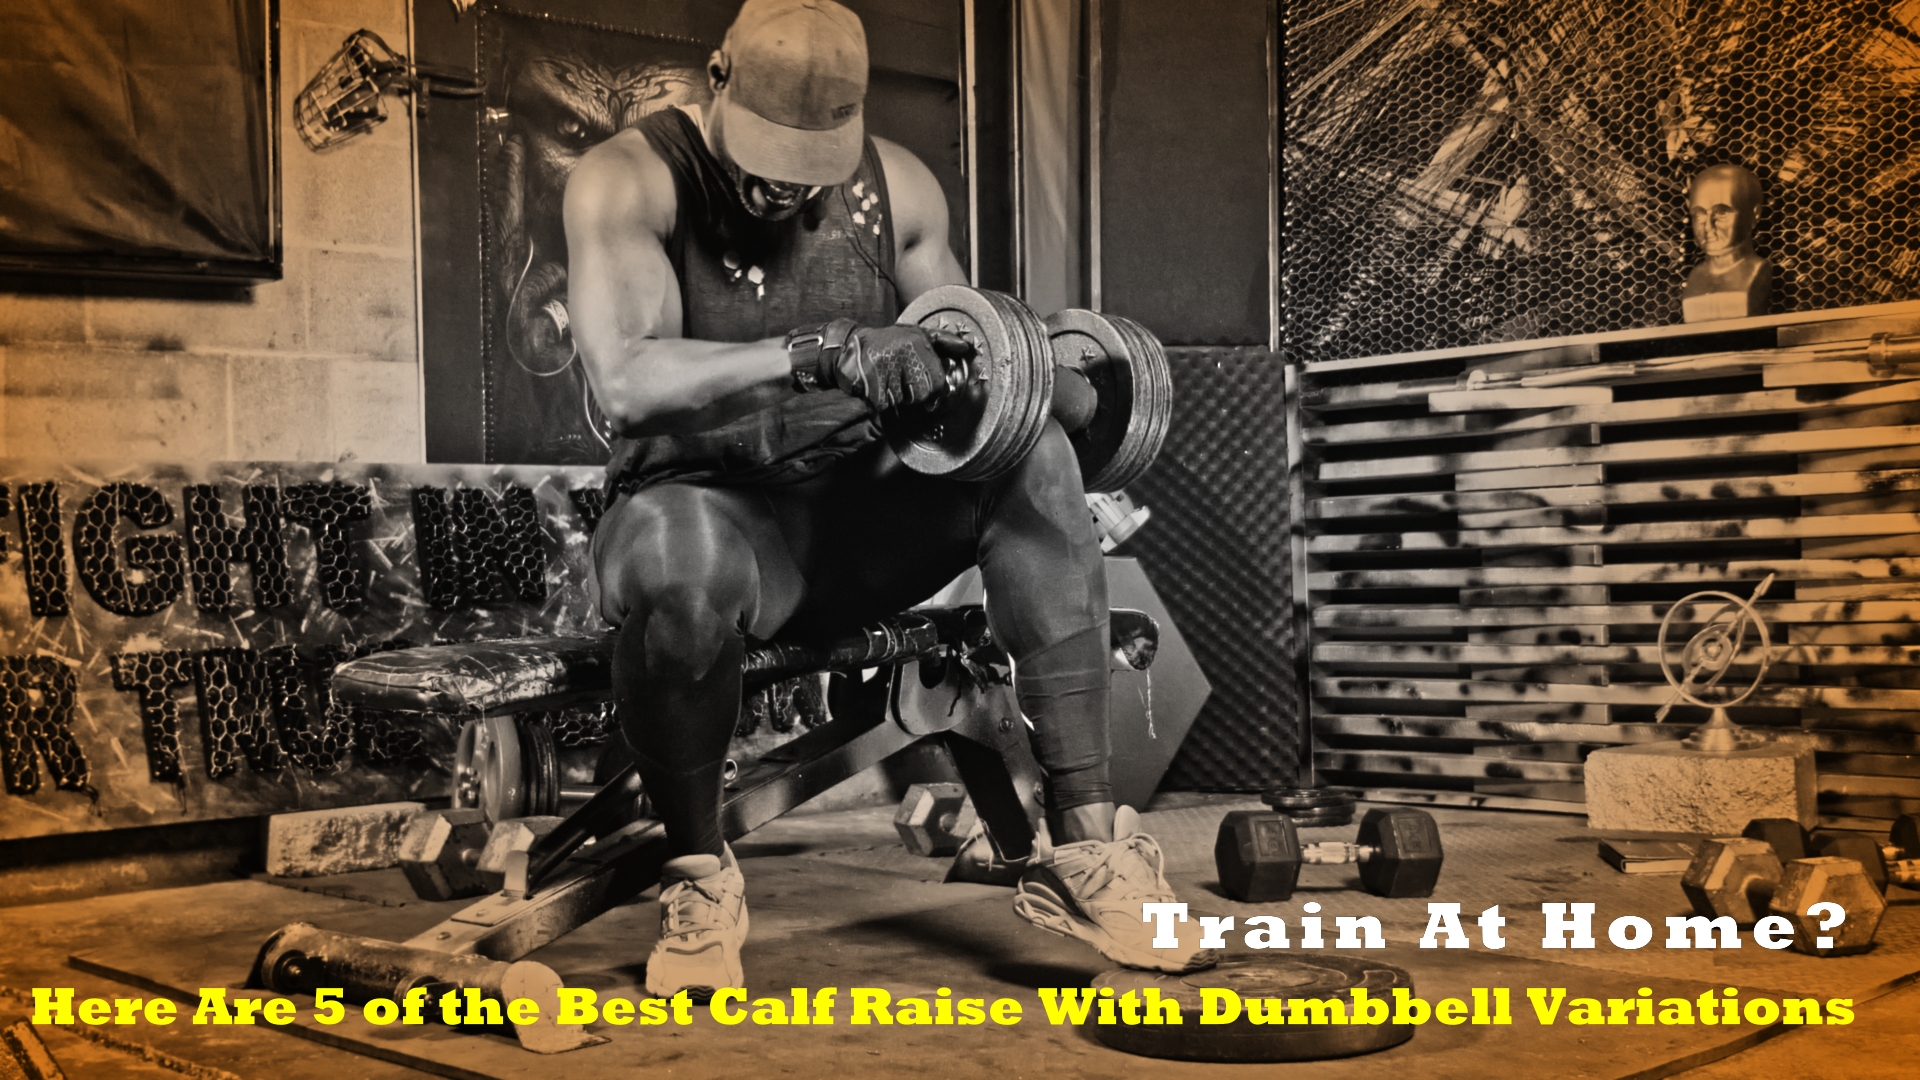 The Best Calf Raise with Dumbbell Variations For Home Lifters